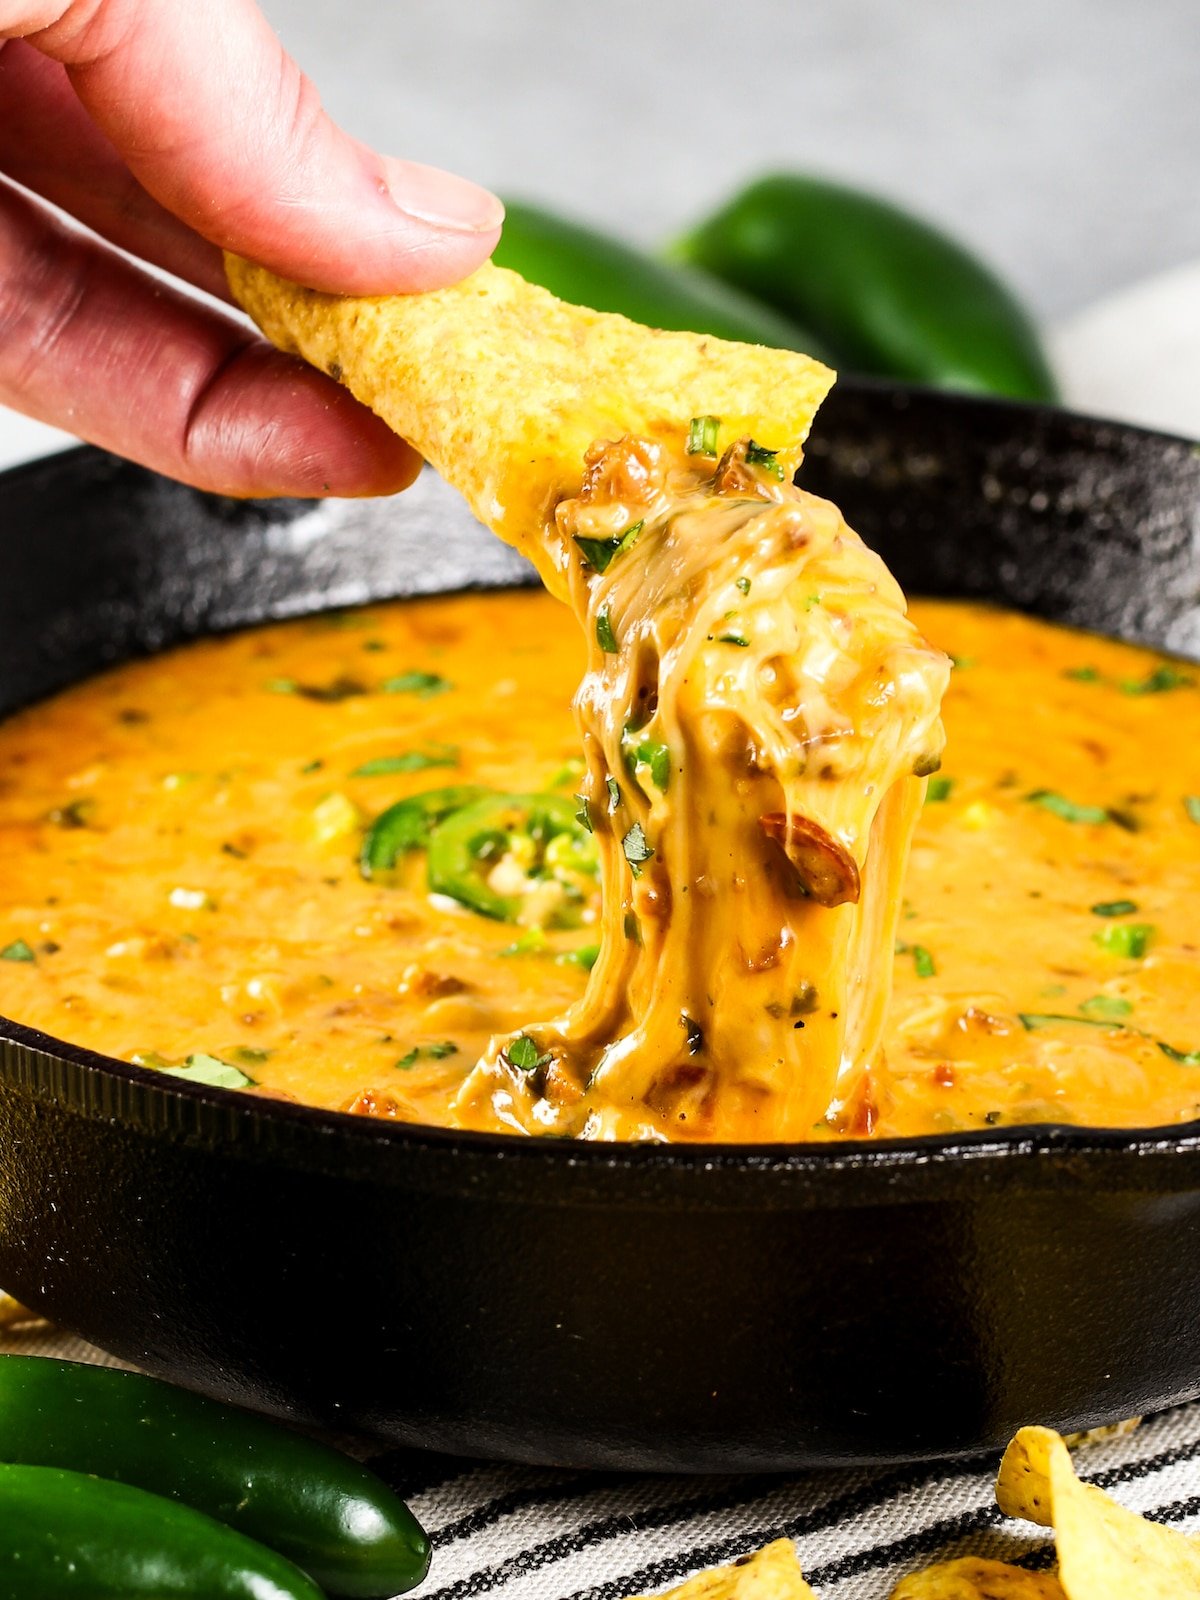 A chip being into a skillet with melted Queso Fundido with Chorizo.